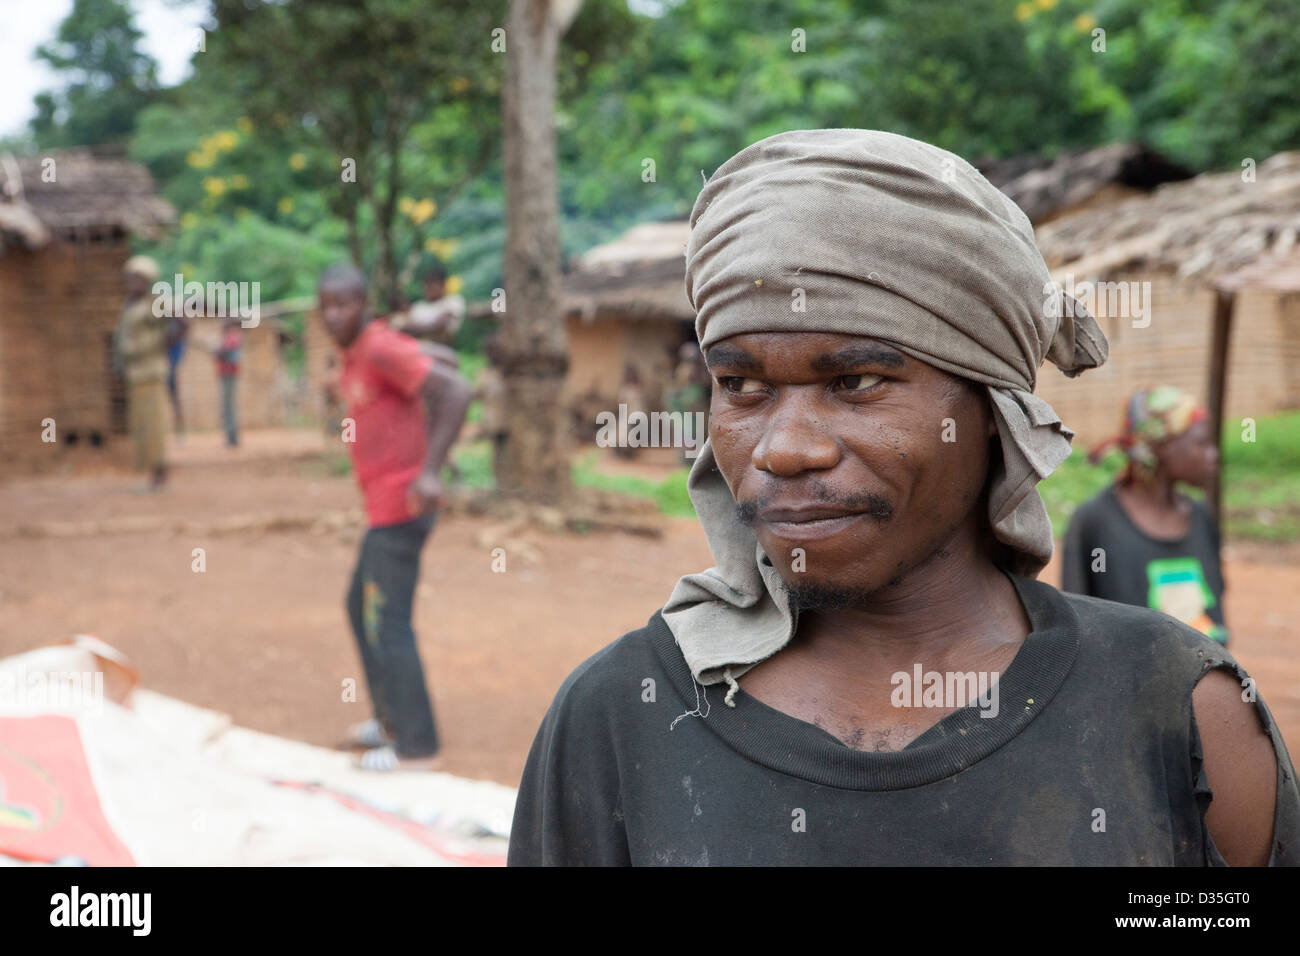 CONGO, 27th Sept 2012: A young man in a mixed Bata (pigmy) and Bantu community, north west Congo. Stock Photo